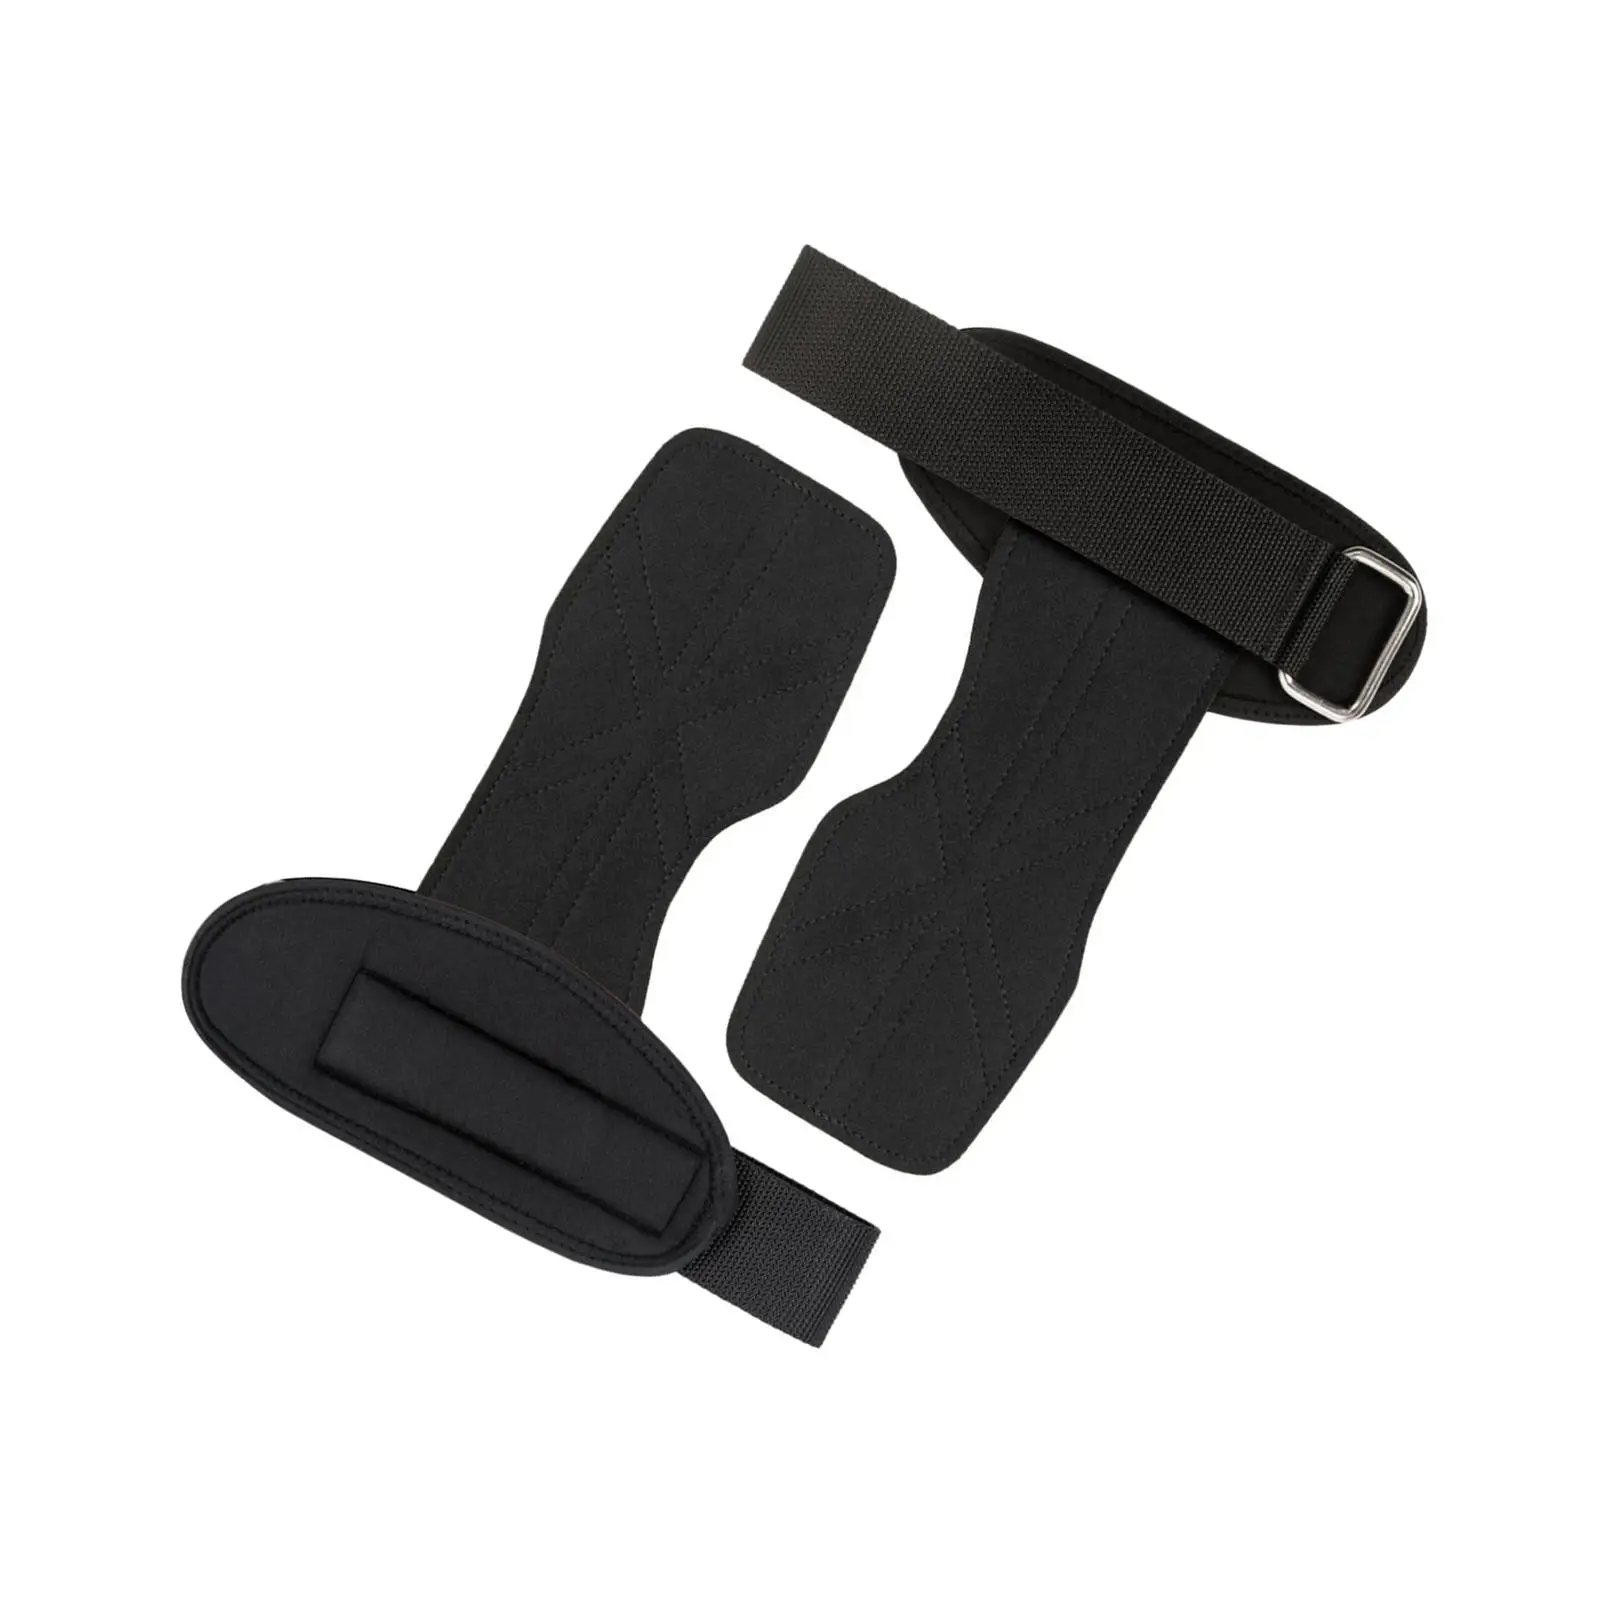 Lifting Wrist Support Wraps Palm Protection Pull Ups Power Lifting Hooks for Bodybuilding Deadlift Fitness Kettlebells Shrugs